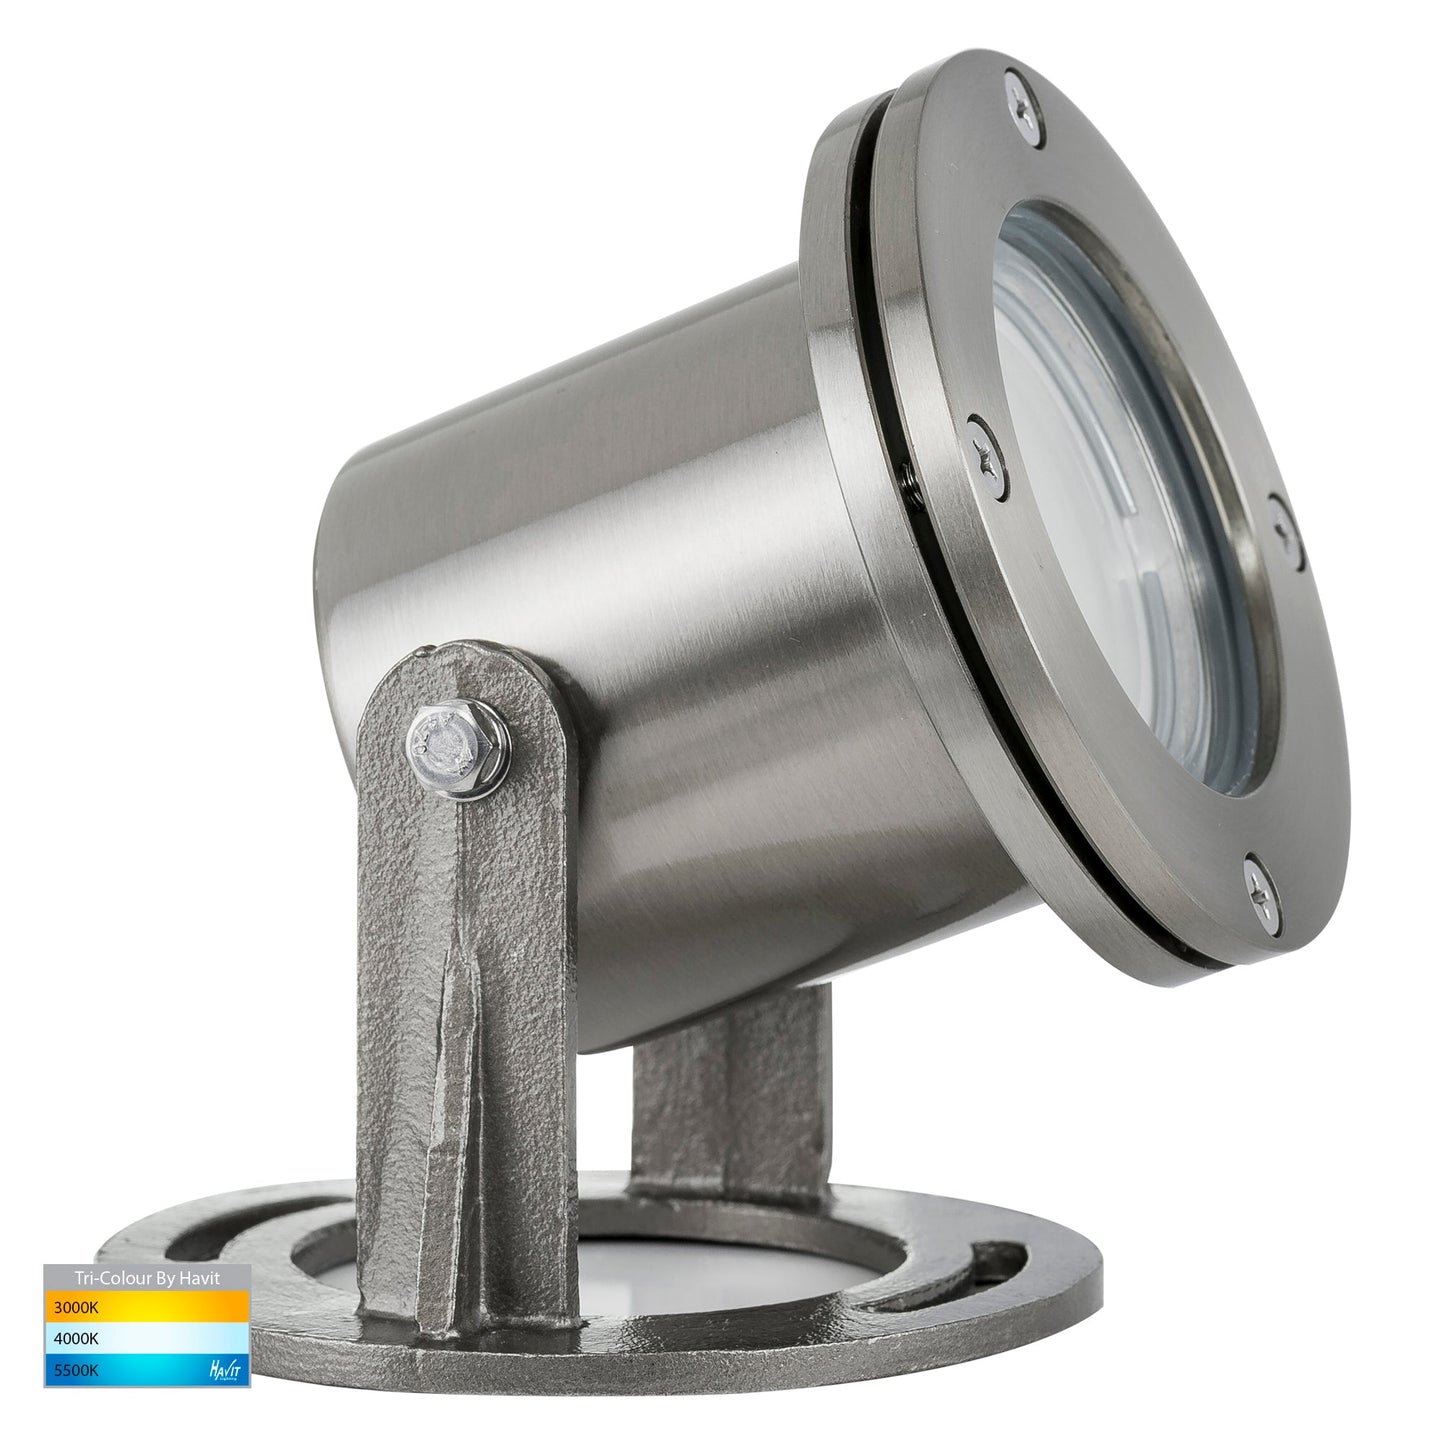 Submersible Pond Light Ip68 316 Stainless Steel  HV1491t